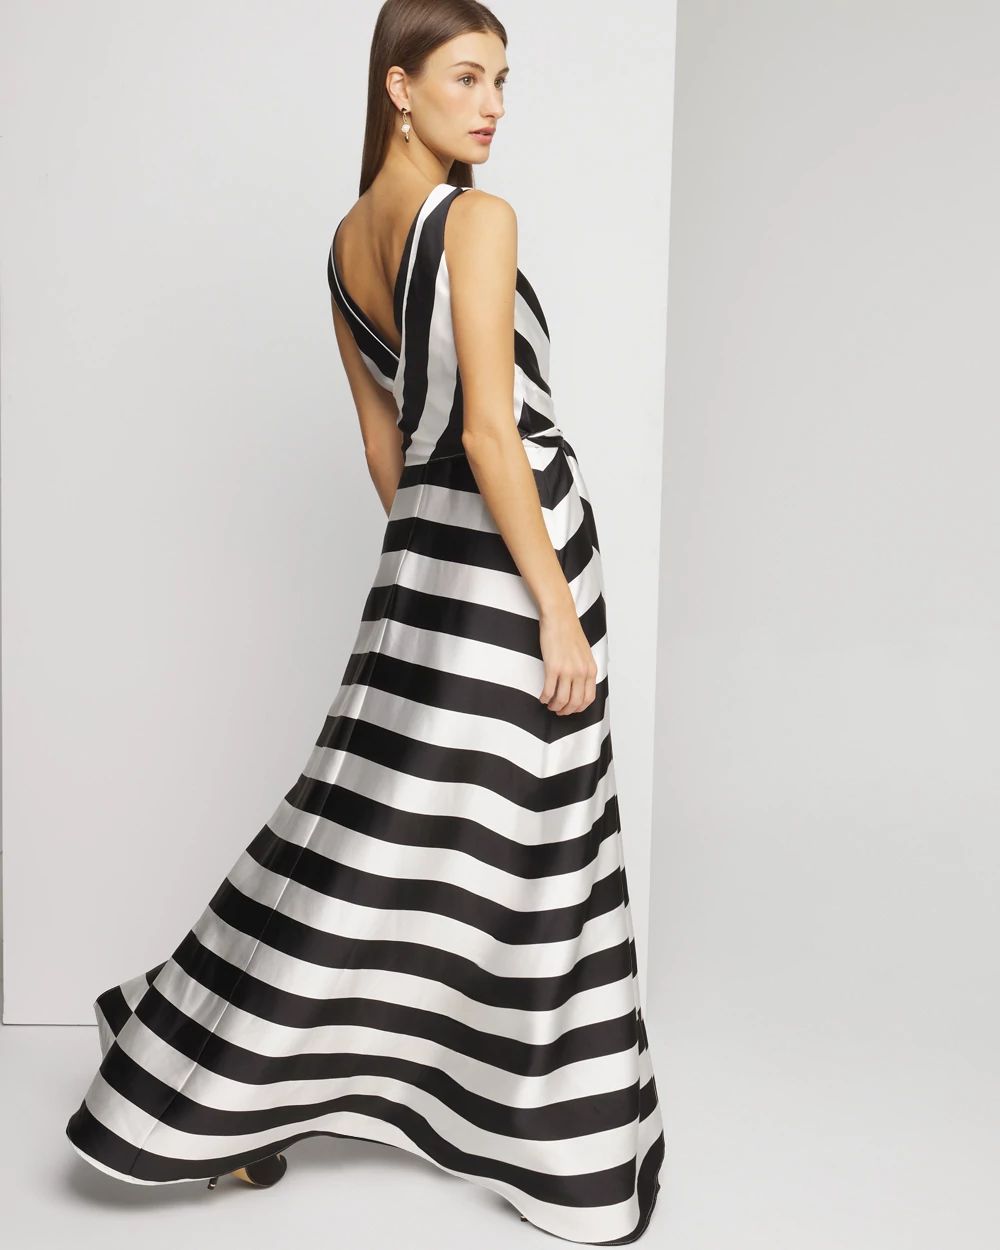 Petite Sleeveless Stripe Fit & Flare Gown click to view larger image.